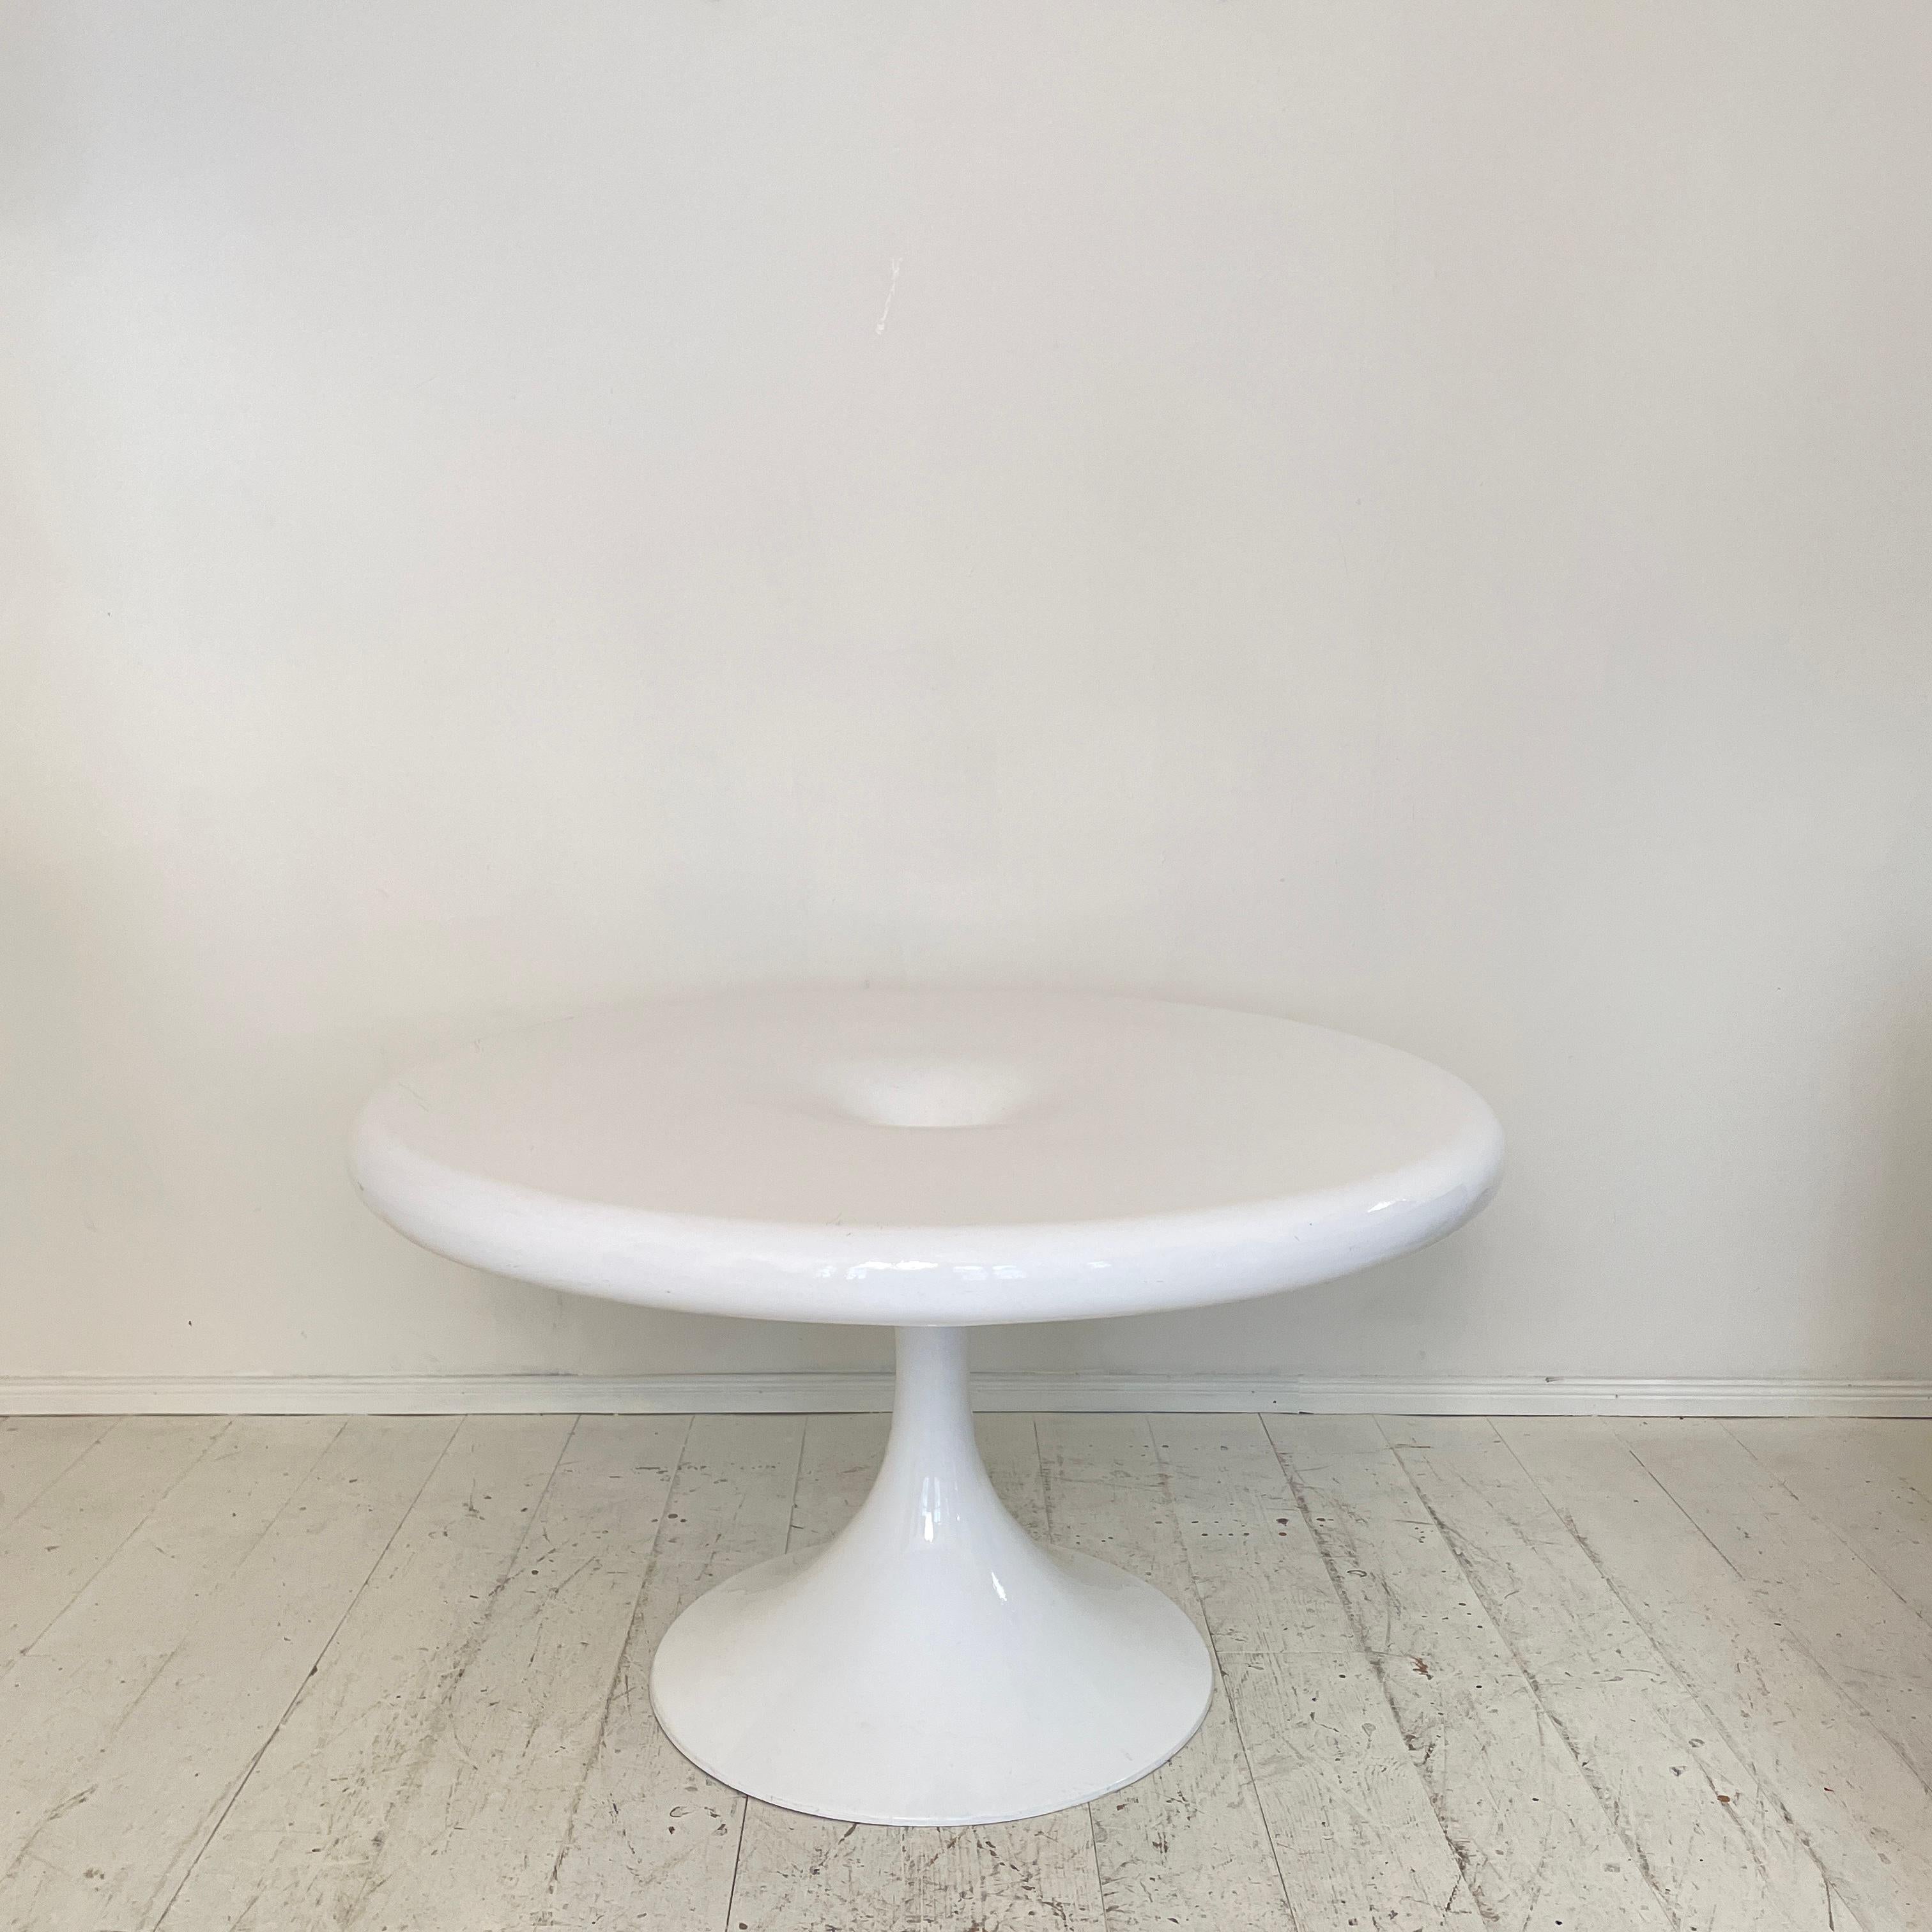 This fantastic and very rare Kantarelli Dining Table by Finnish designer Eero Aarnio was made in white fiberglass-reinforced polyester. The circular table top is resting on a central tulip foot.
The table was made circa 1970.
Great Vintage Condition